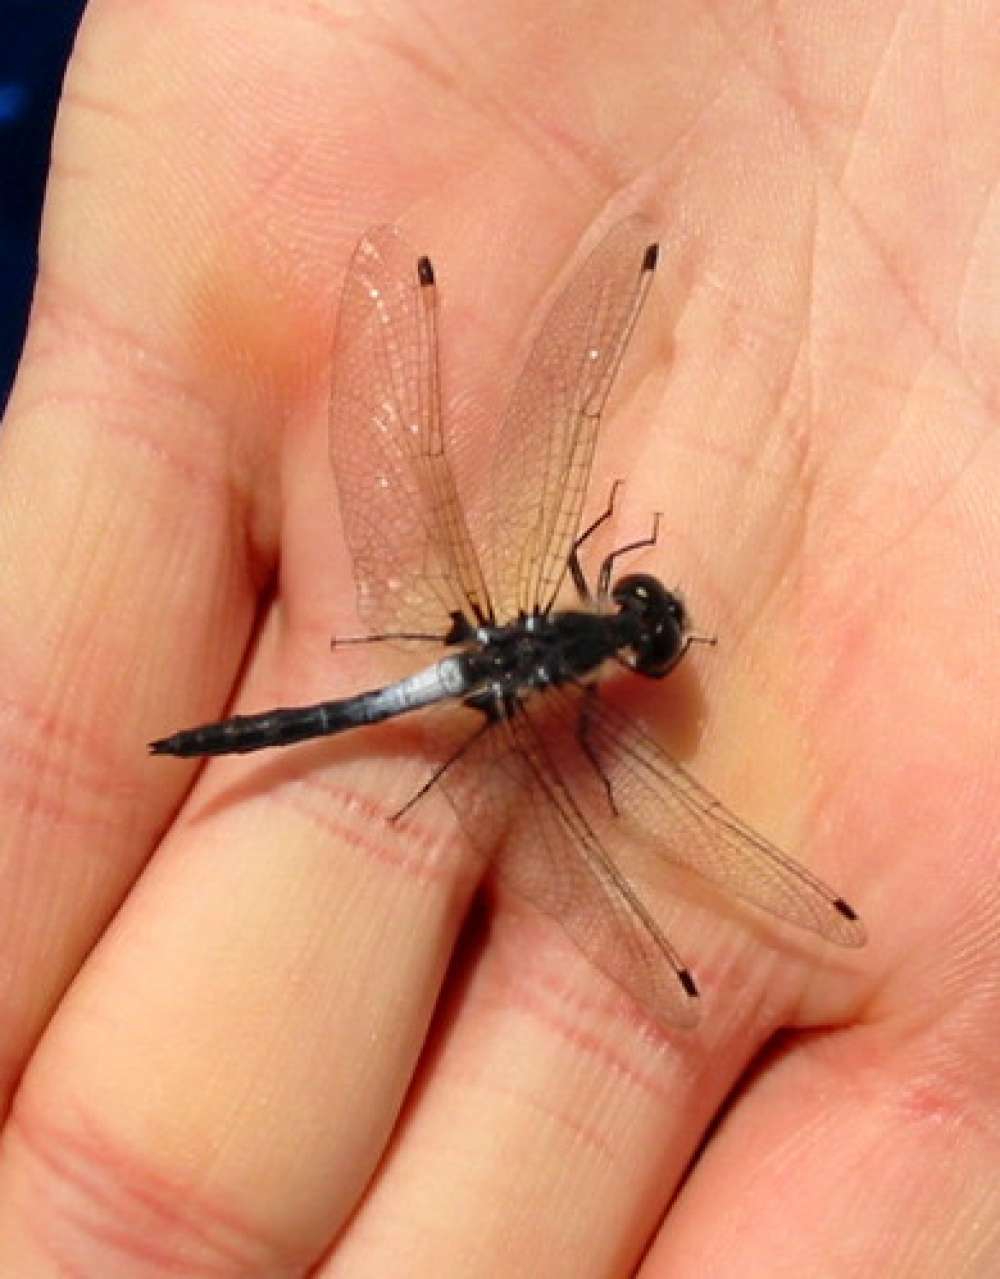 Dragonfly in the hand.